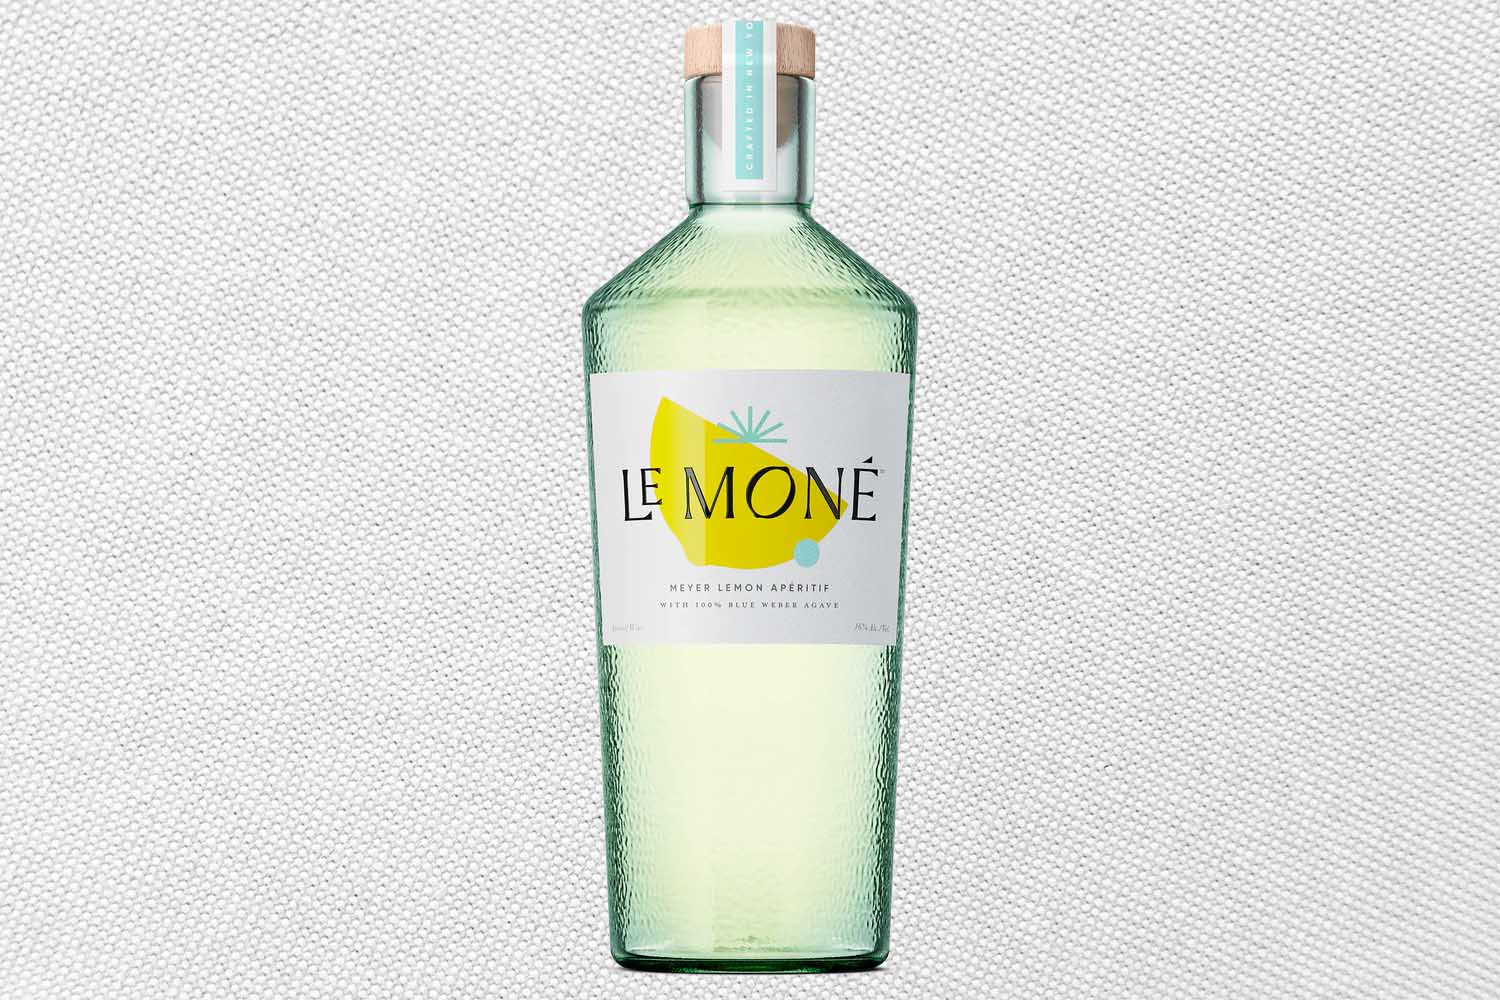 Le Moné Meyer Lemon, one of the best women's gifts to give this September